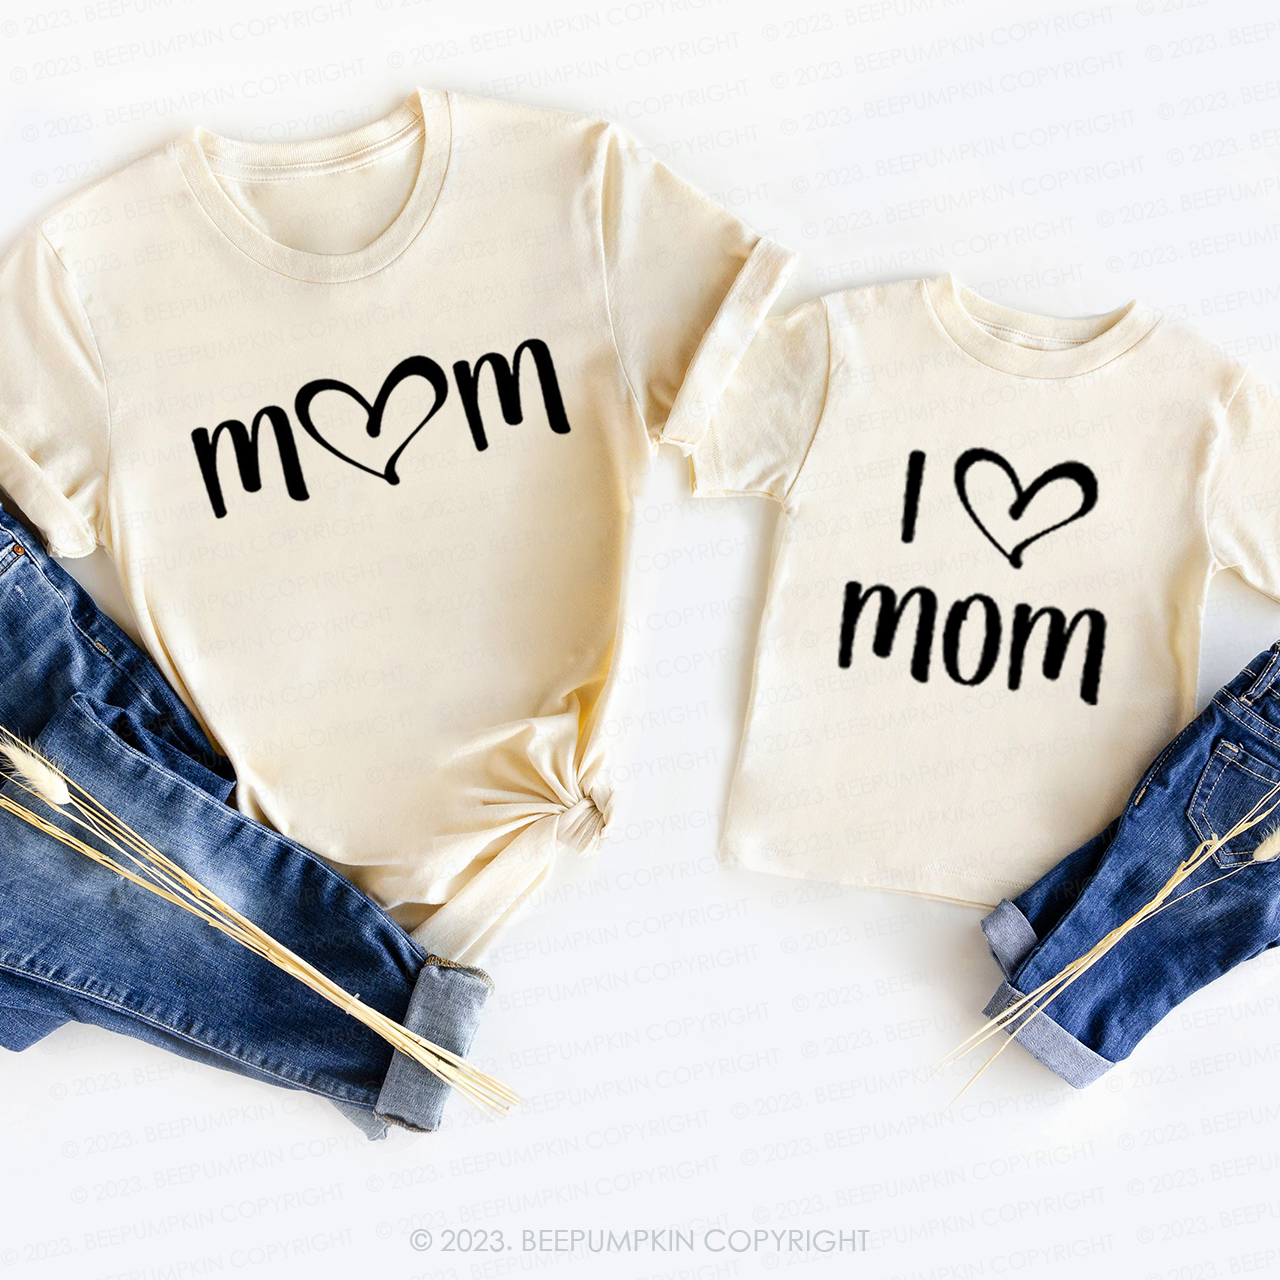 I Love Mom Matching T-Shirts For Mom&Me